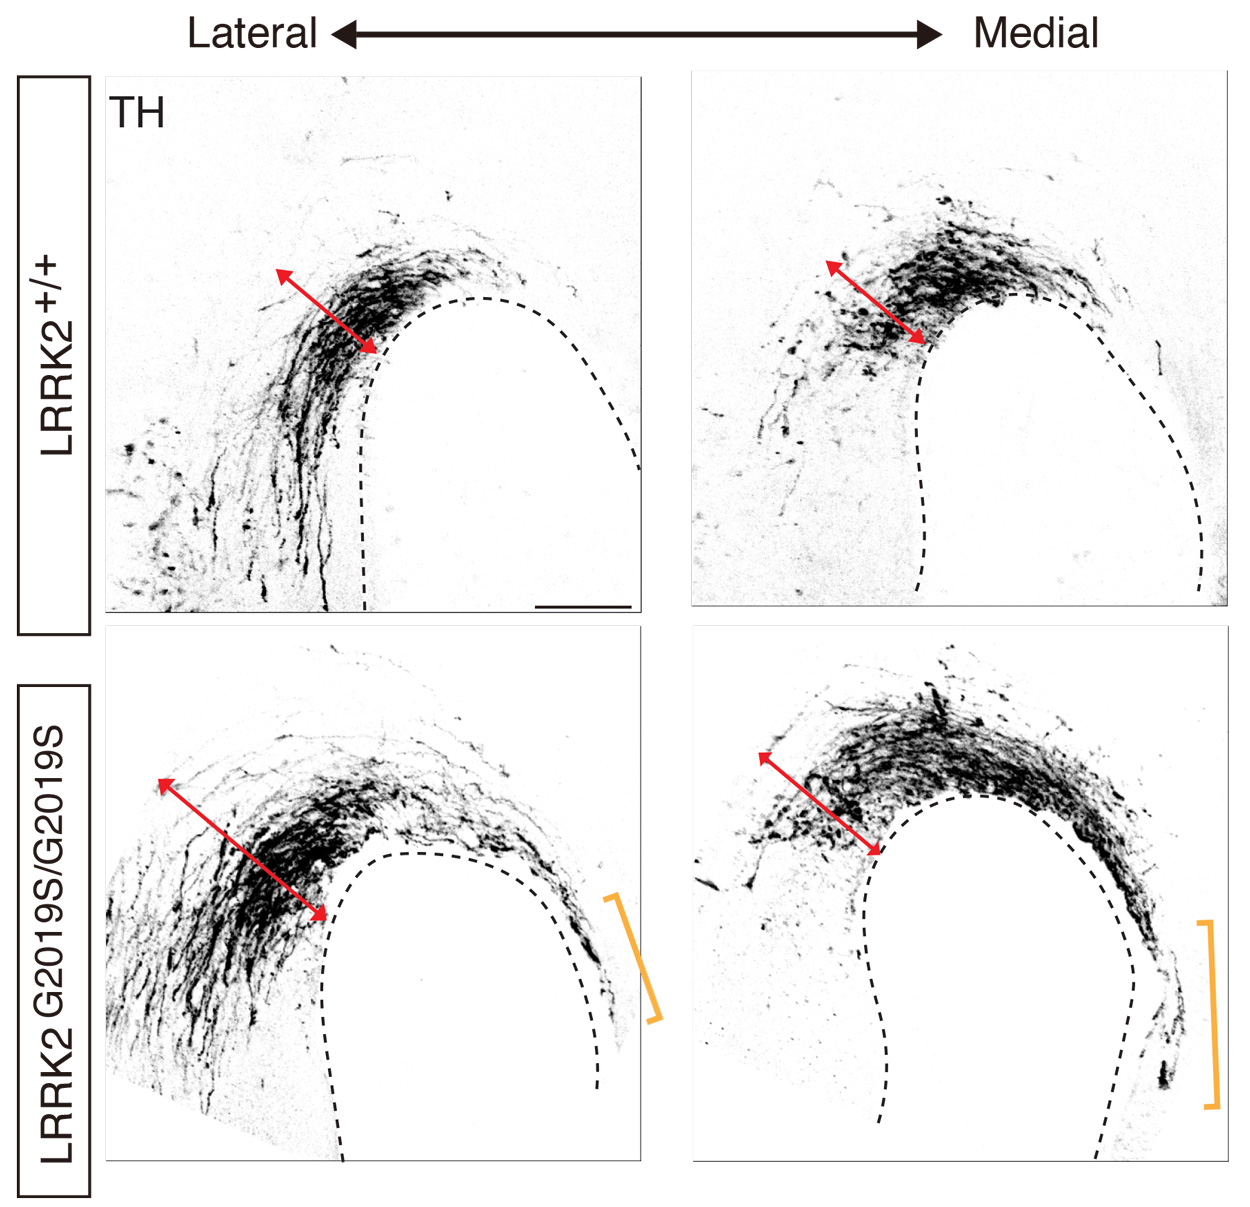 A series of neuronal images show abnormal development of midbrain dopaminergic axons.